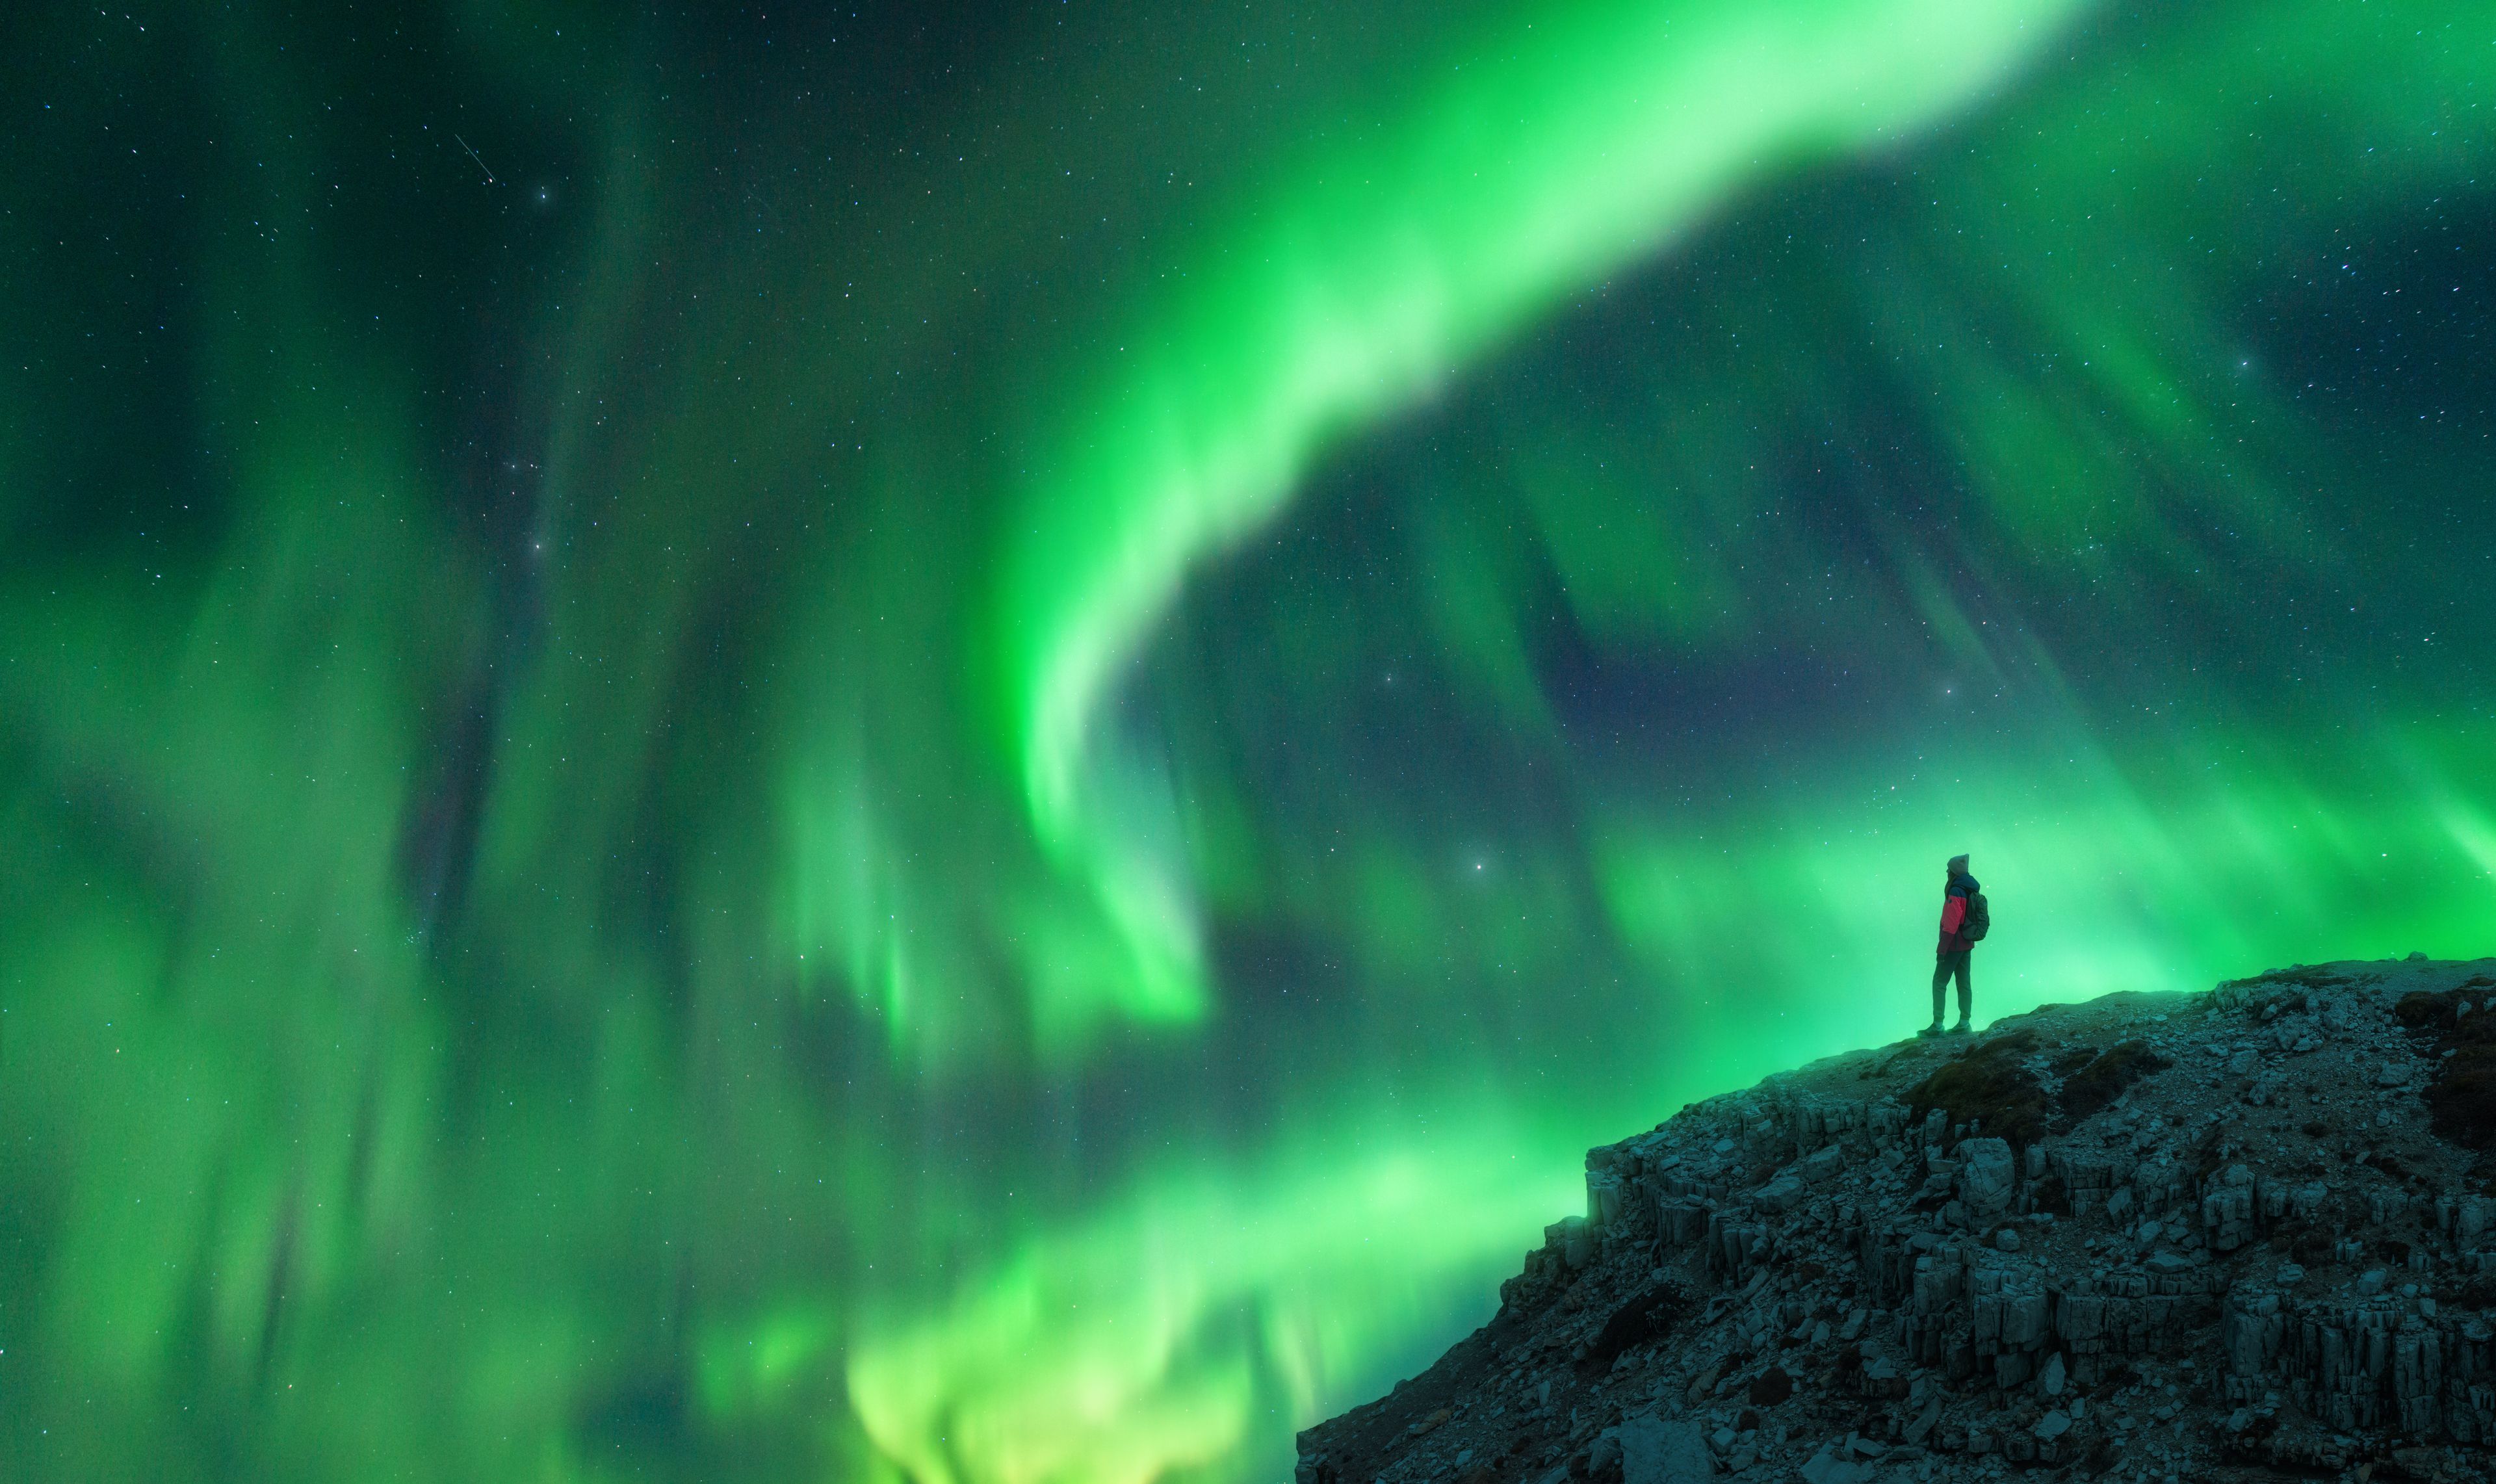 a person found Northern Lights during her winter vacation in iceland in february